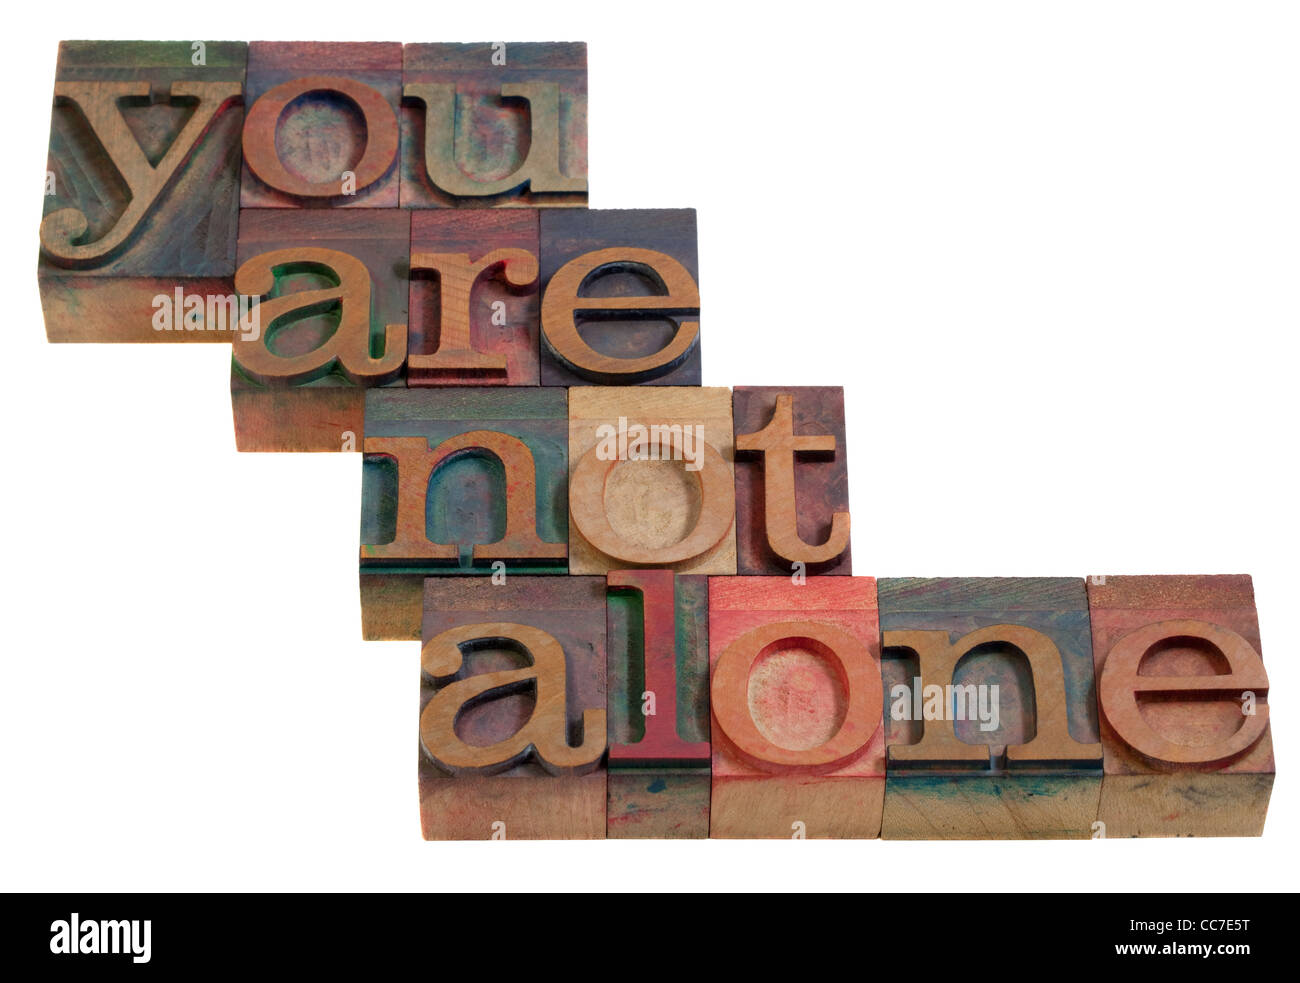 you are not alone - words in vintage wooden letterpress printing blocks, stained by color inks, isolated on white Stock Photo